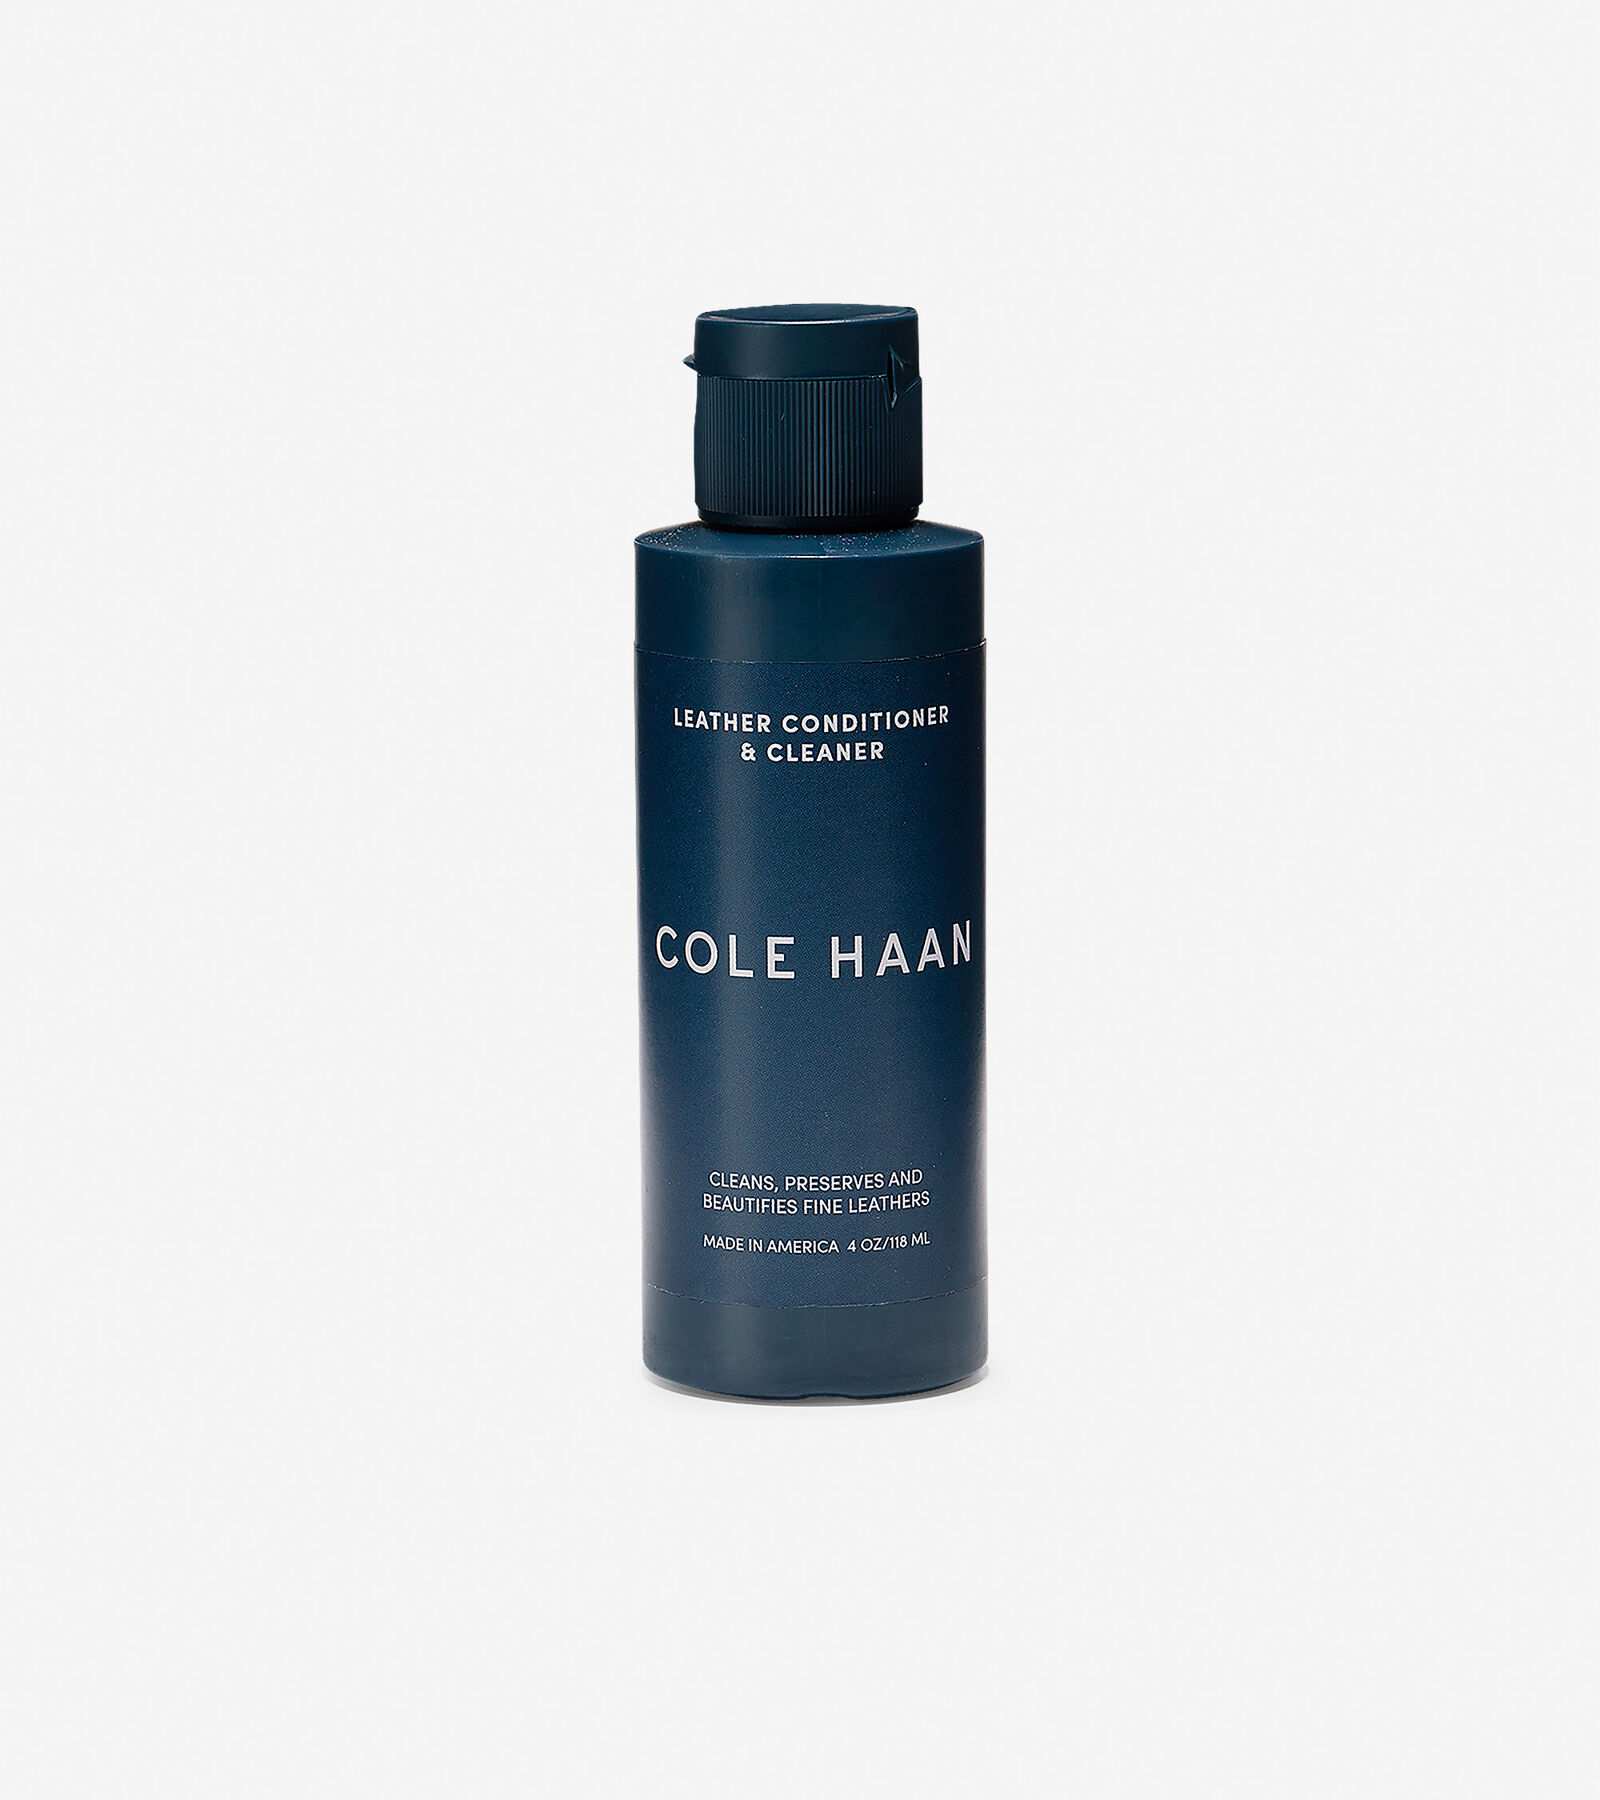 Cole Haan Leather Conditioner